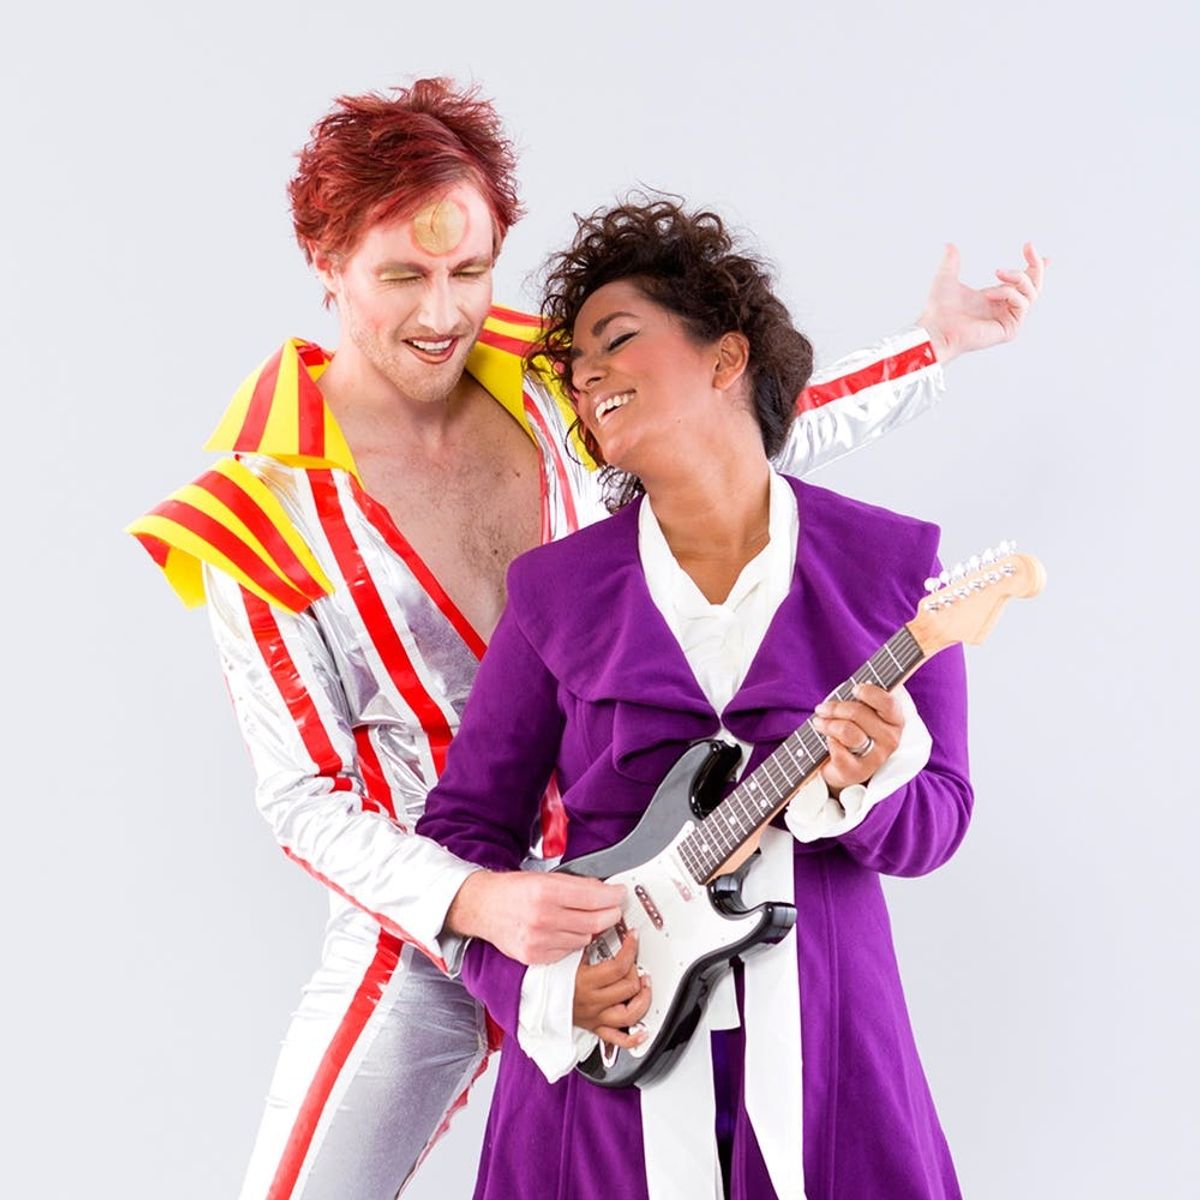 David Bowie and Prince Couples Costume